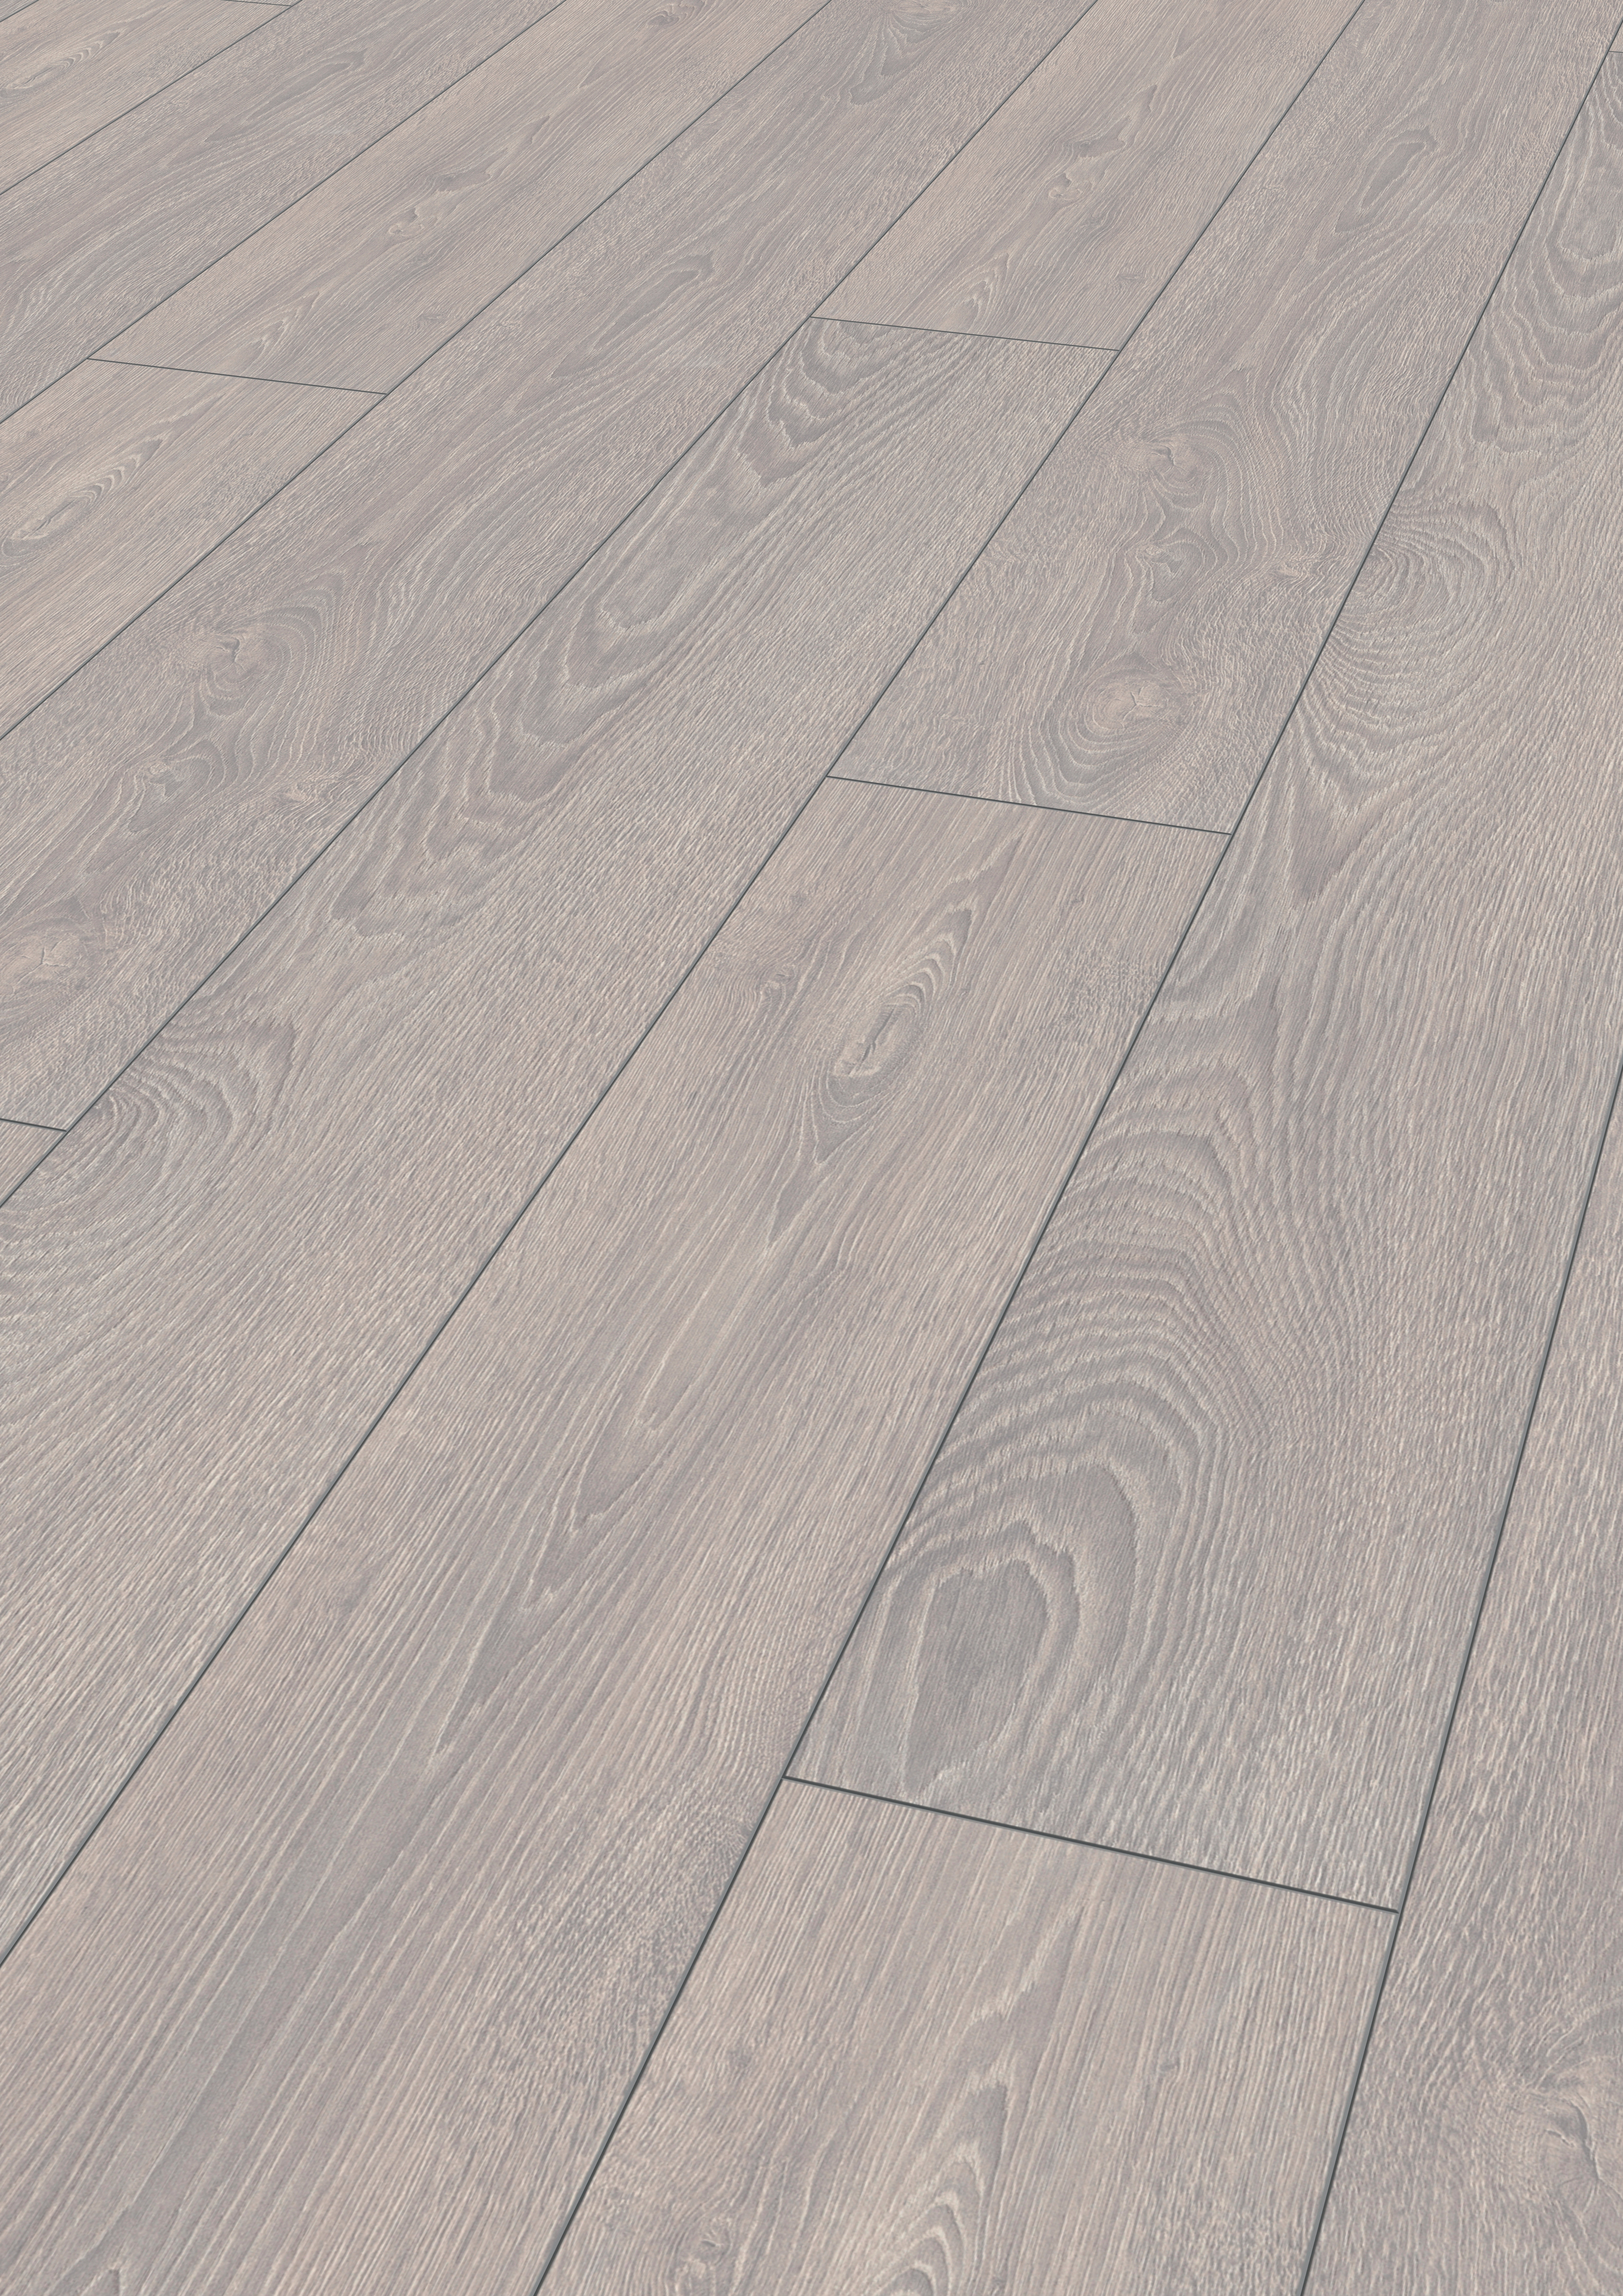 11 Elegant Hardwood Floor Estimate Sheet 2024 free download hardwood floor estimate sheet of mammut laminate flooring in country house plank style kronotex pertaining to download picture